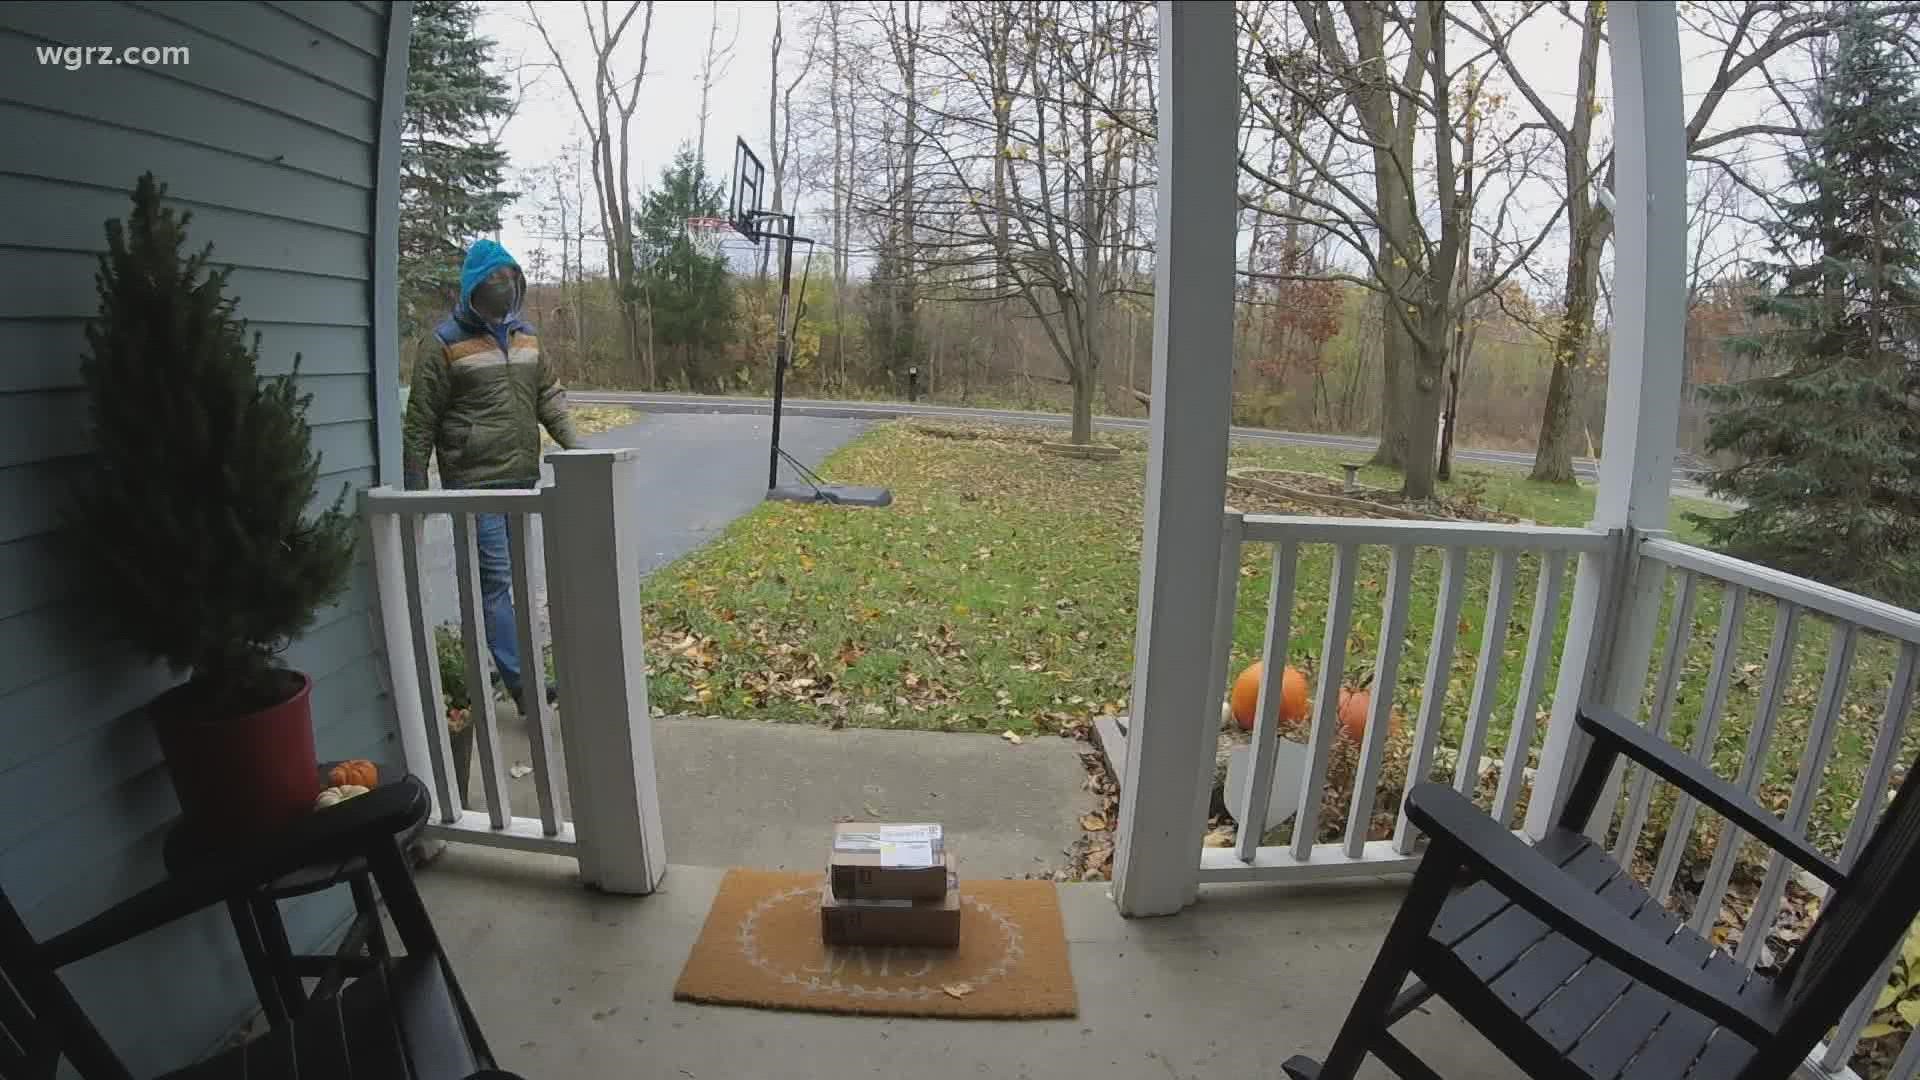 More shopping is being done online than ever before, which means more packages are being shipped and delivered to homes across Western New York.